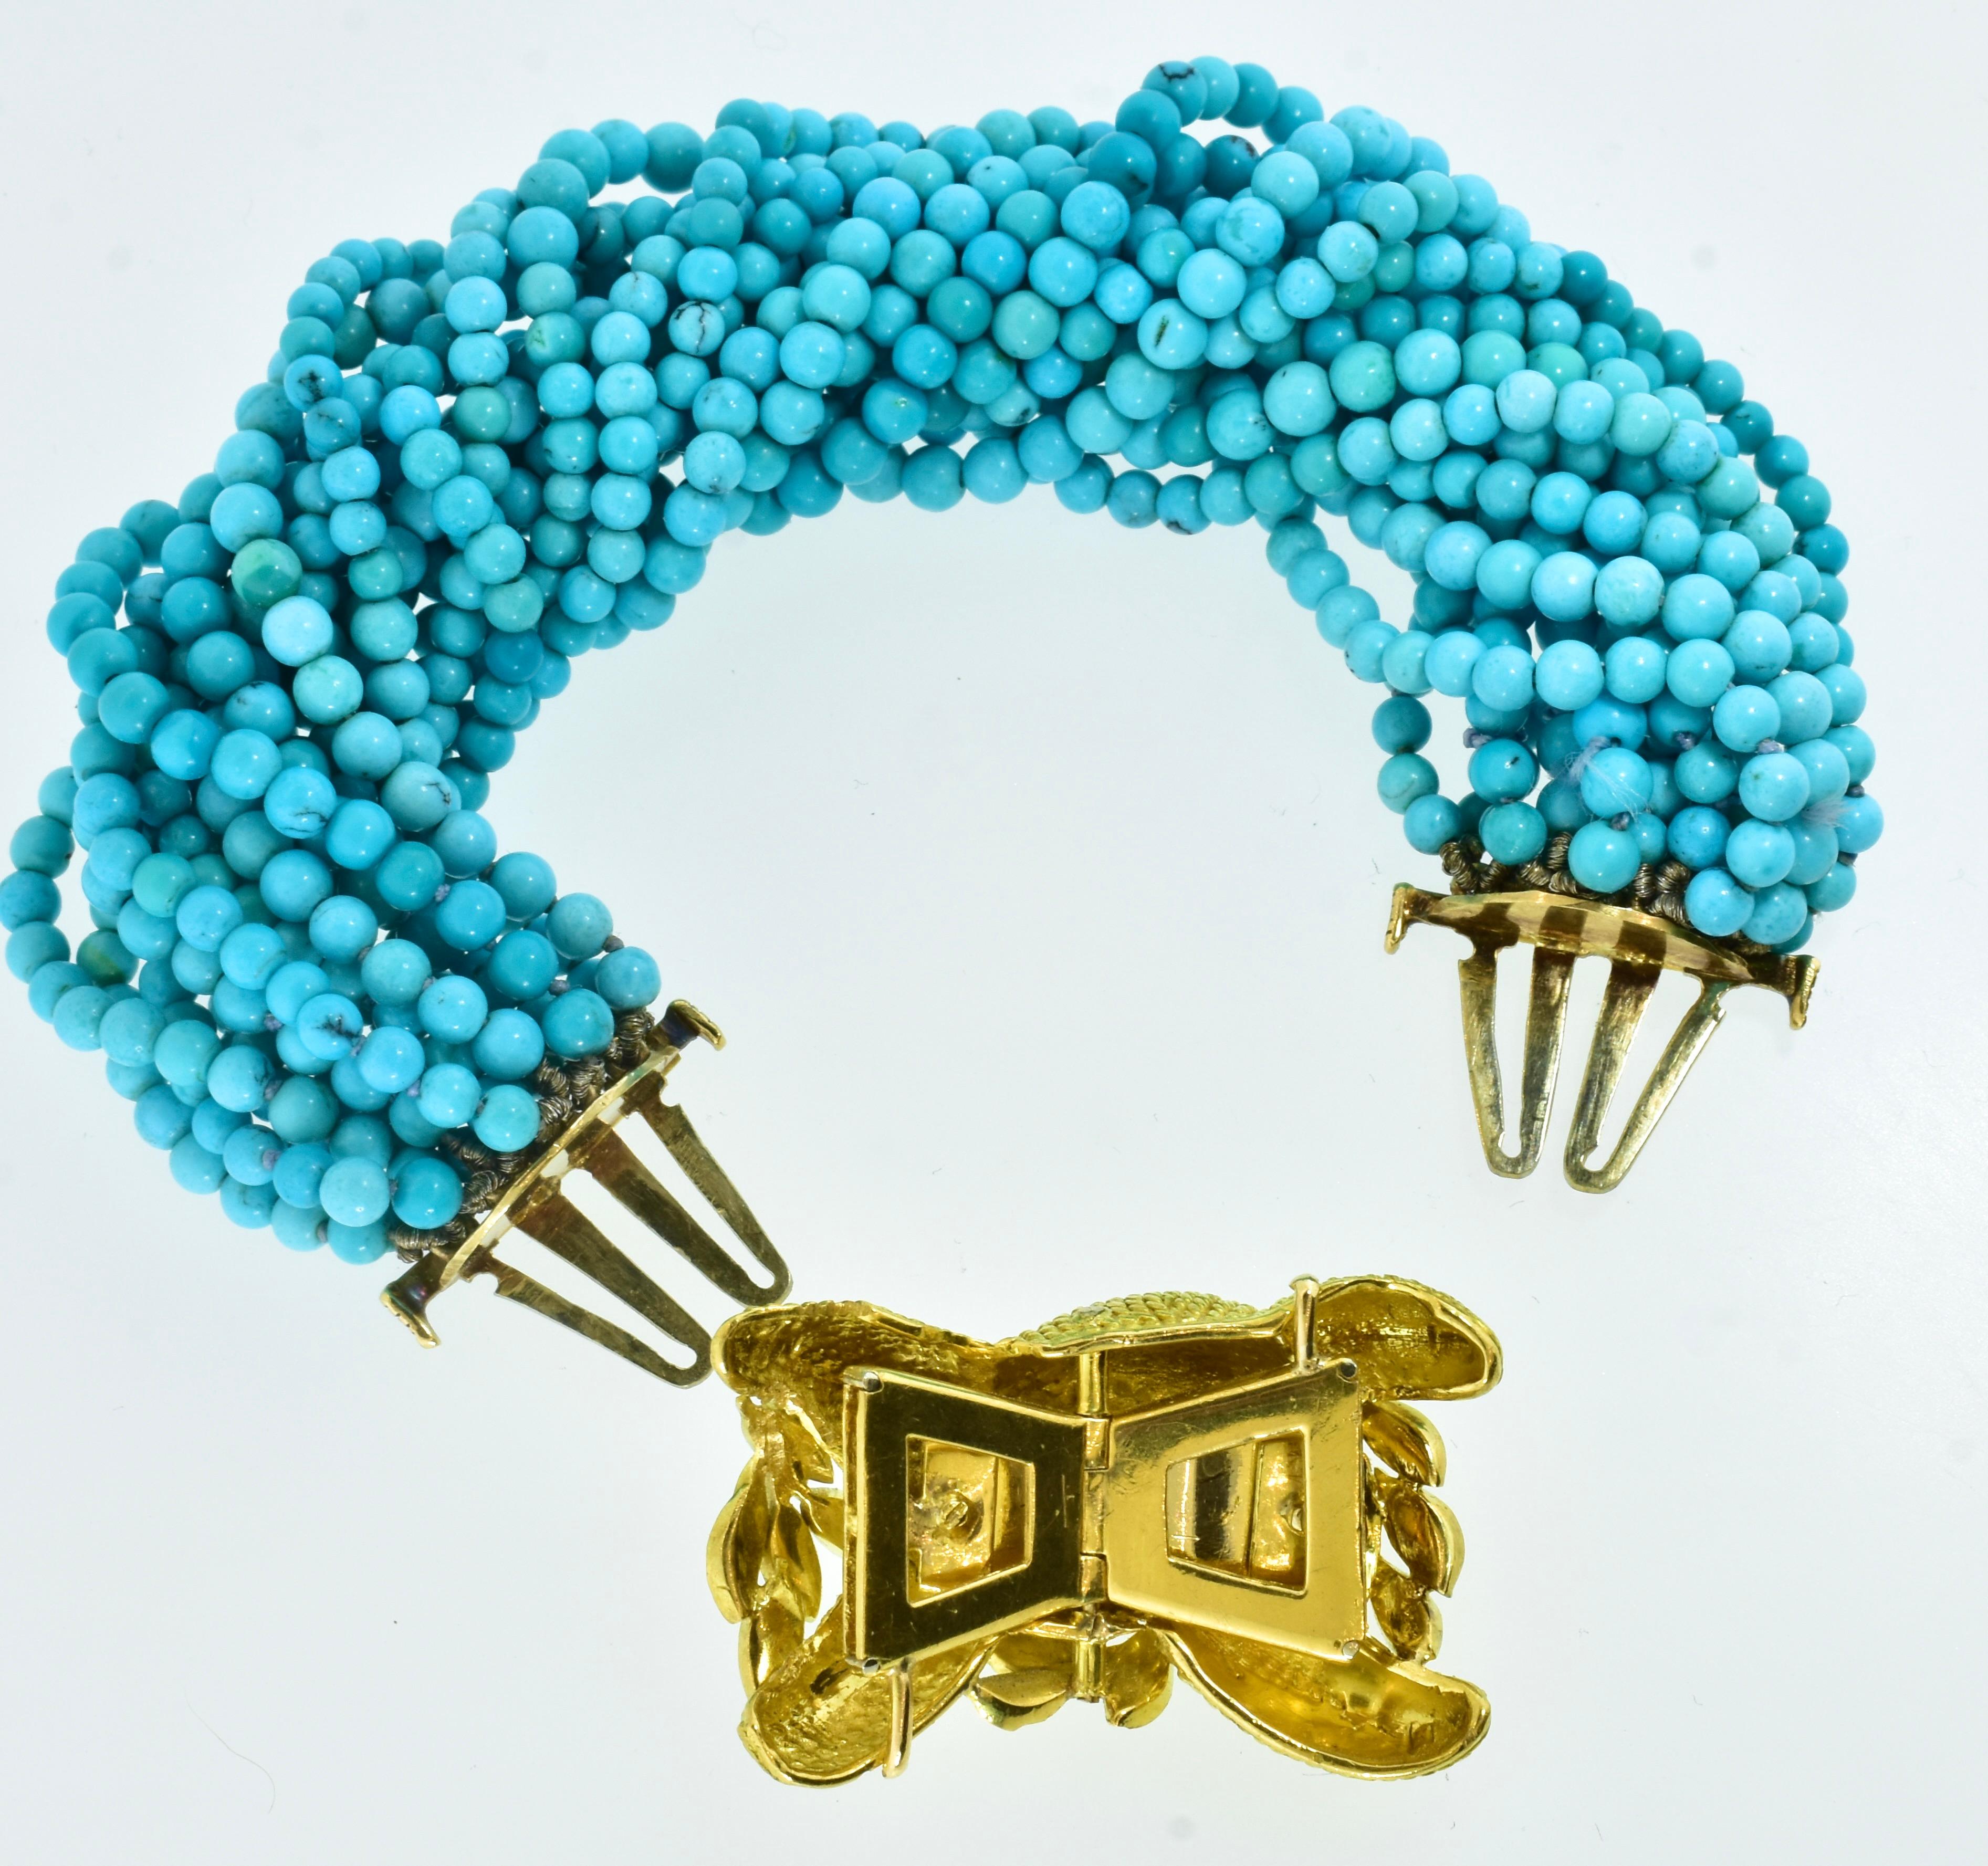 Fine Turquoise Bead Torsade Bracelet Centering an 18K High Relief Clasp, c. 1965 For Sale 4